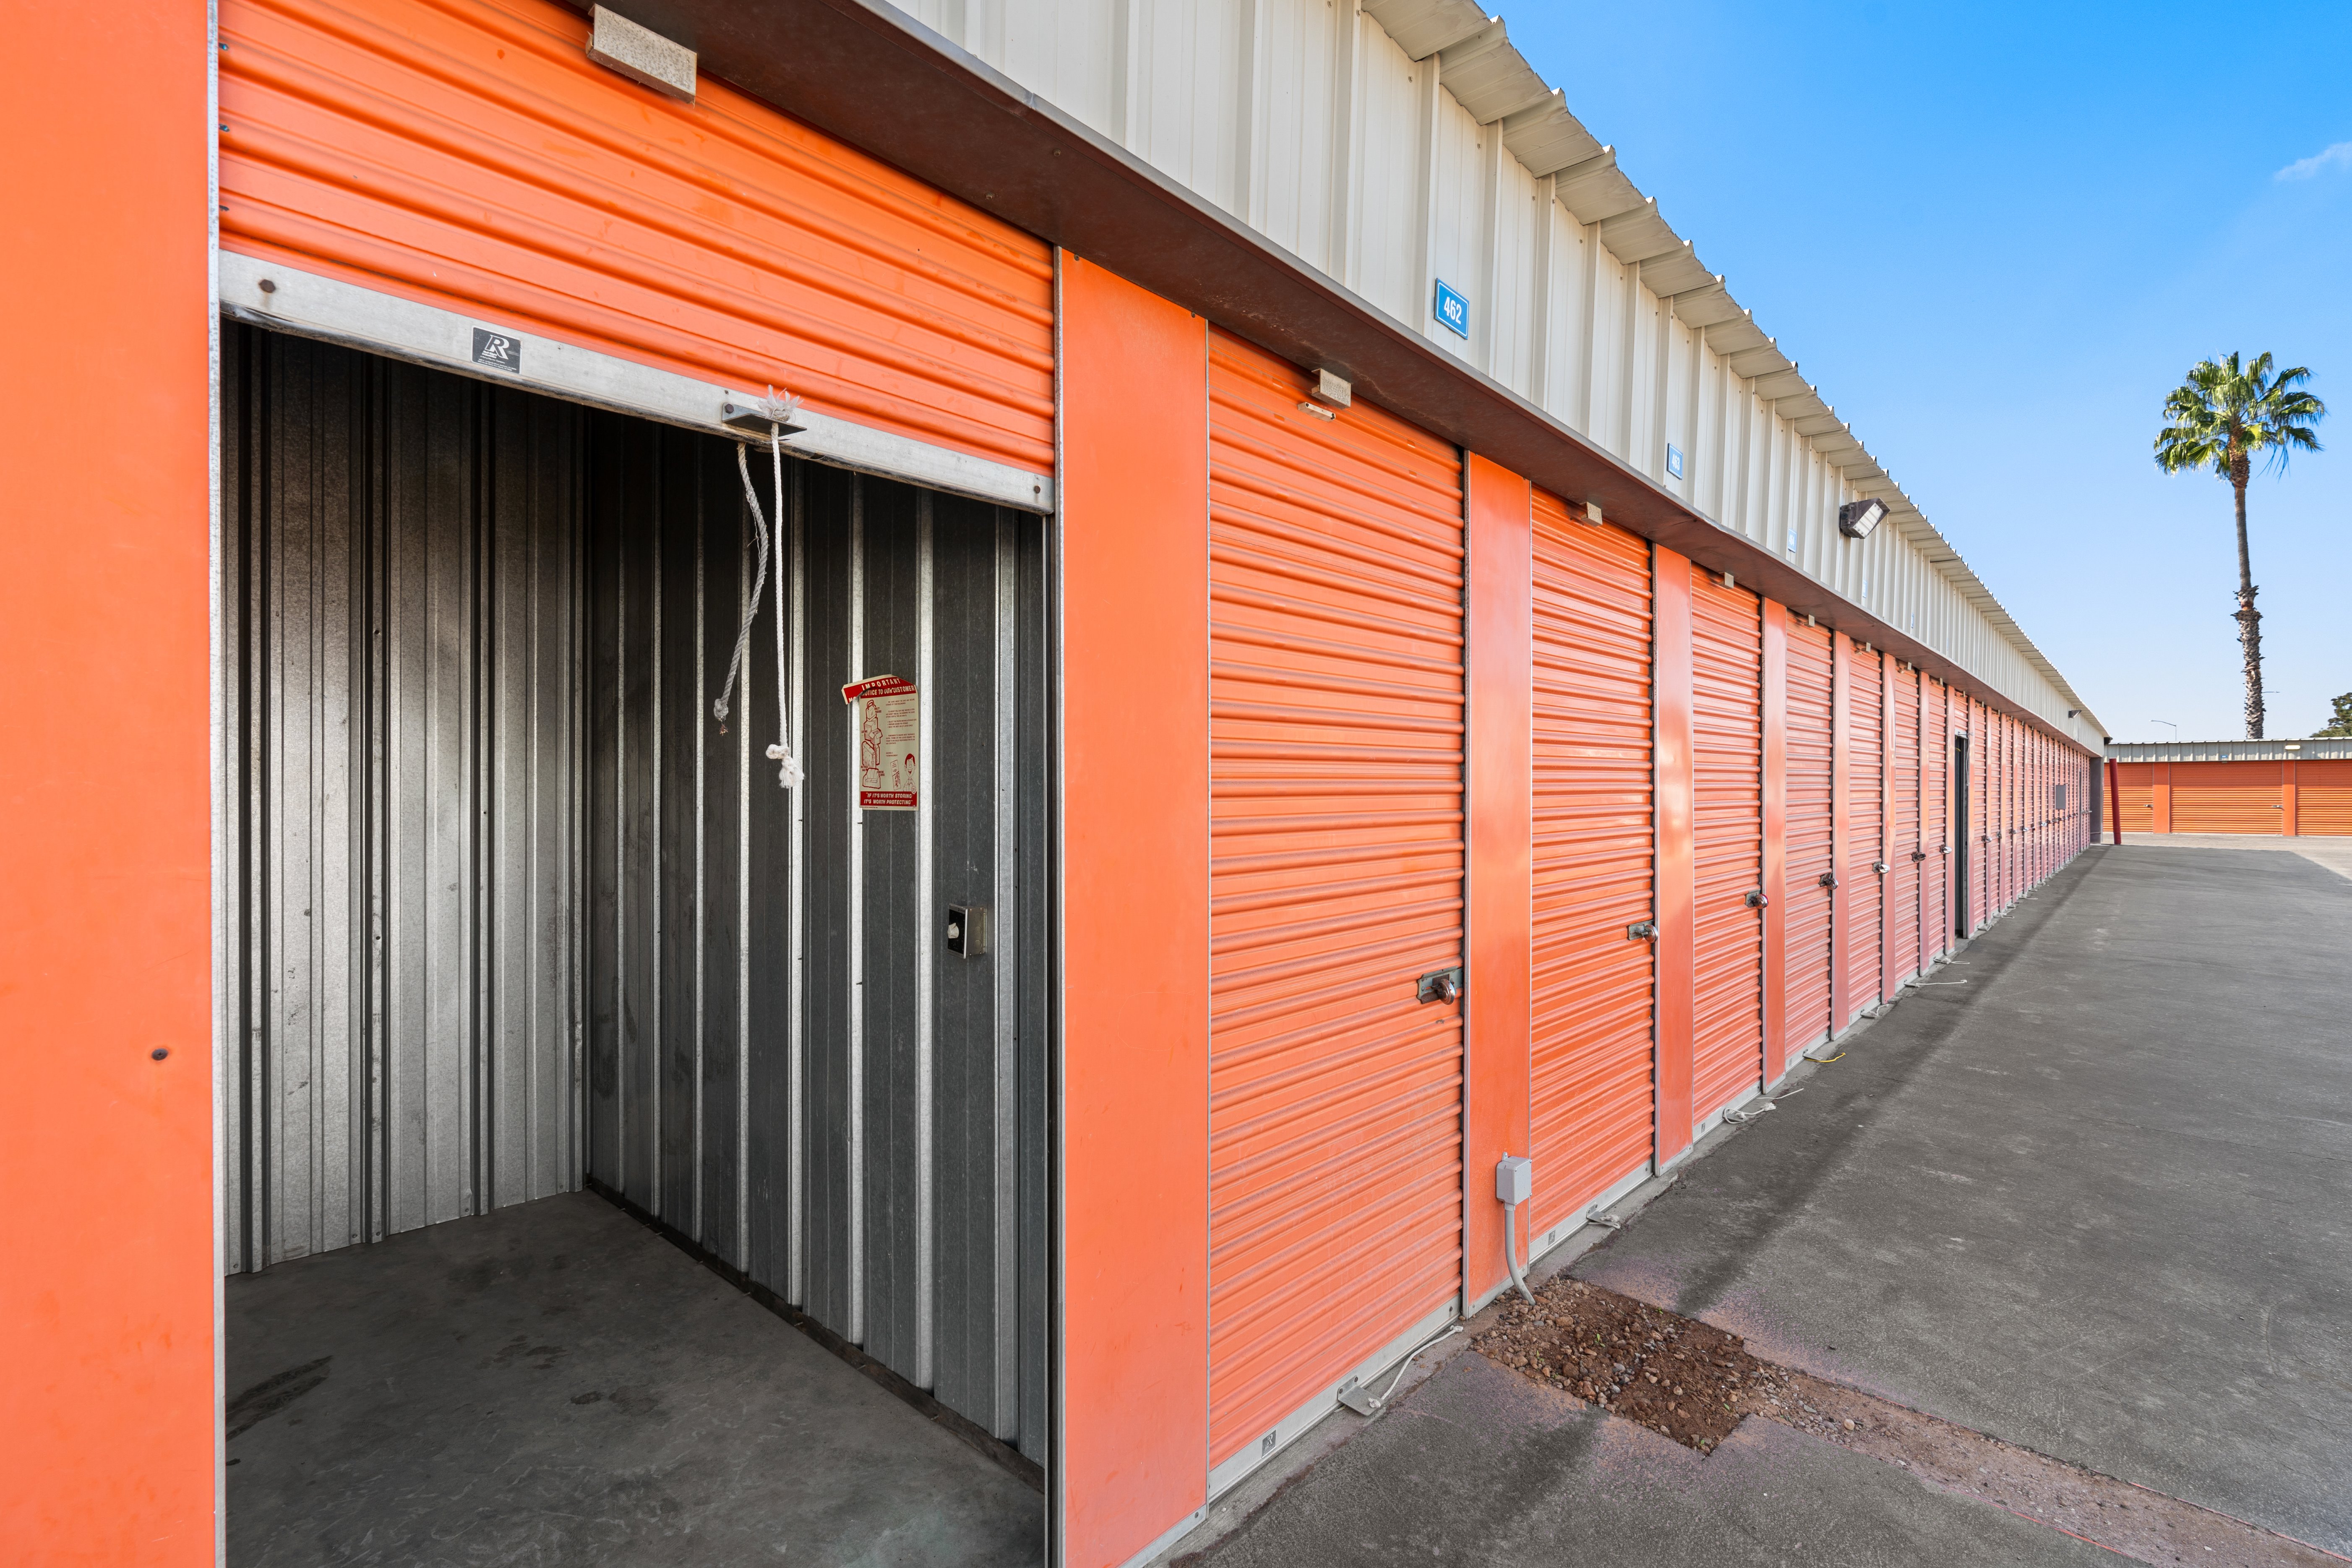 Drive Up Self Storage Units In A Wide Range Of Sizes